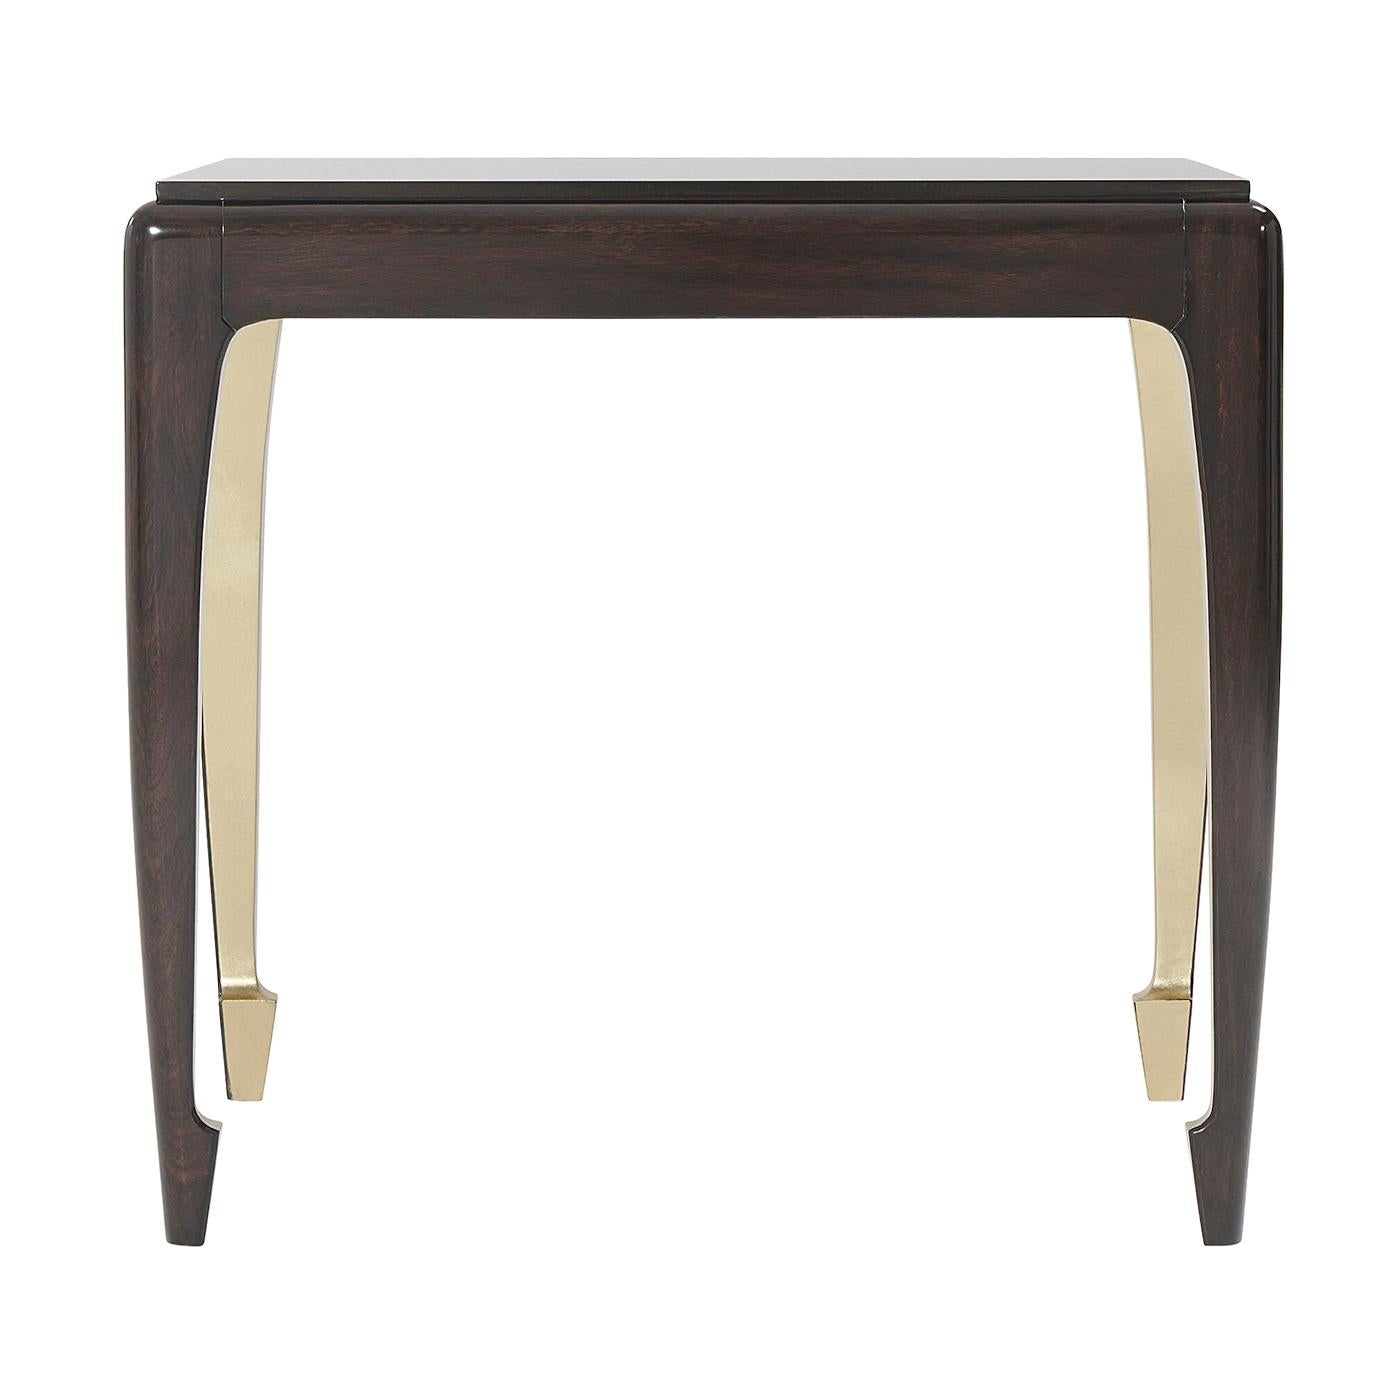 Mid-Century Modern style Chinese influenced mahogany veneered top and solid mahogany curved leg side table with hand-leafed 18-karat gold finish interior legs.
Dimensions: 24